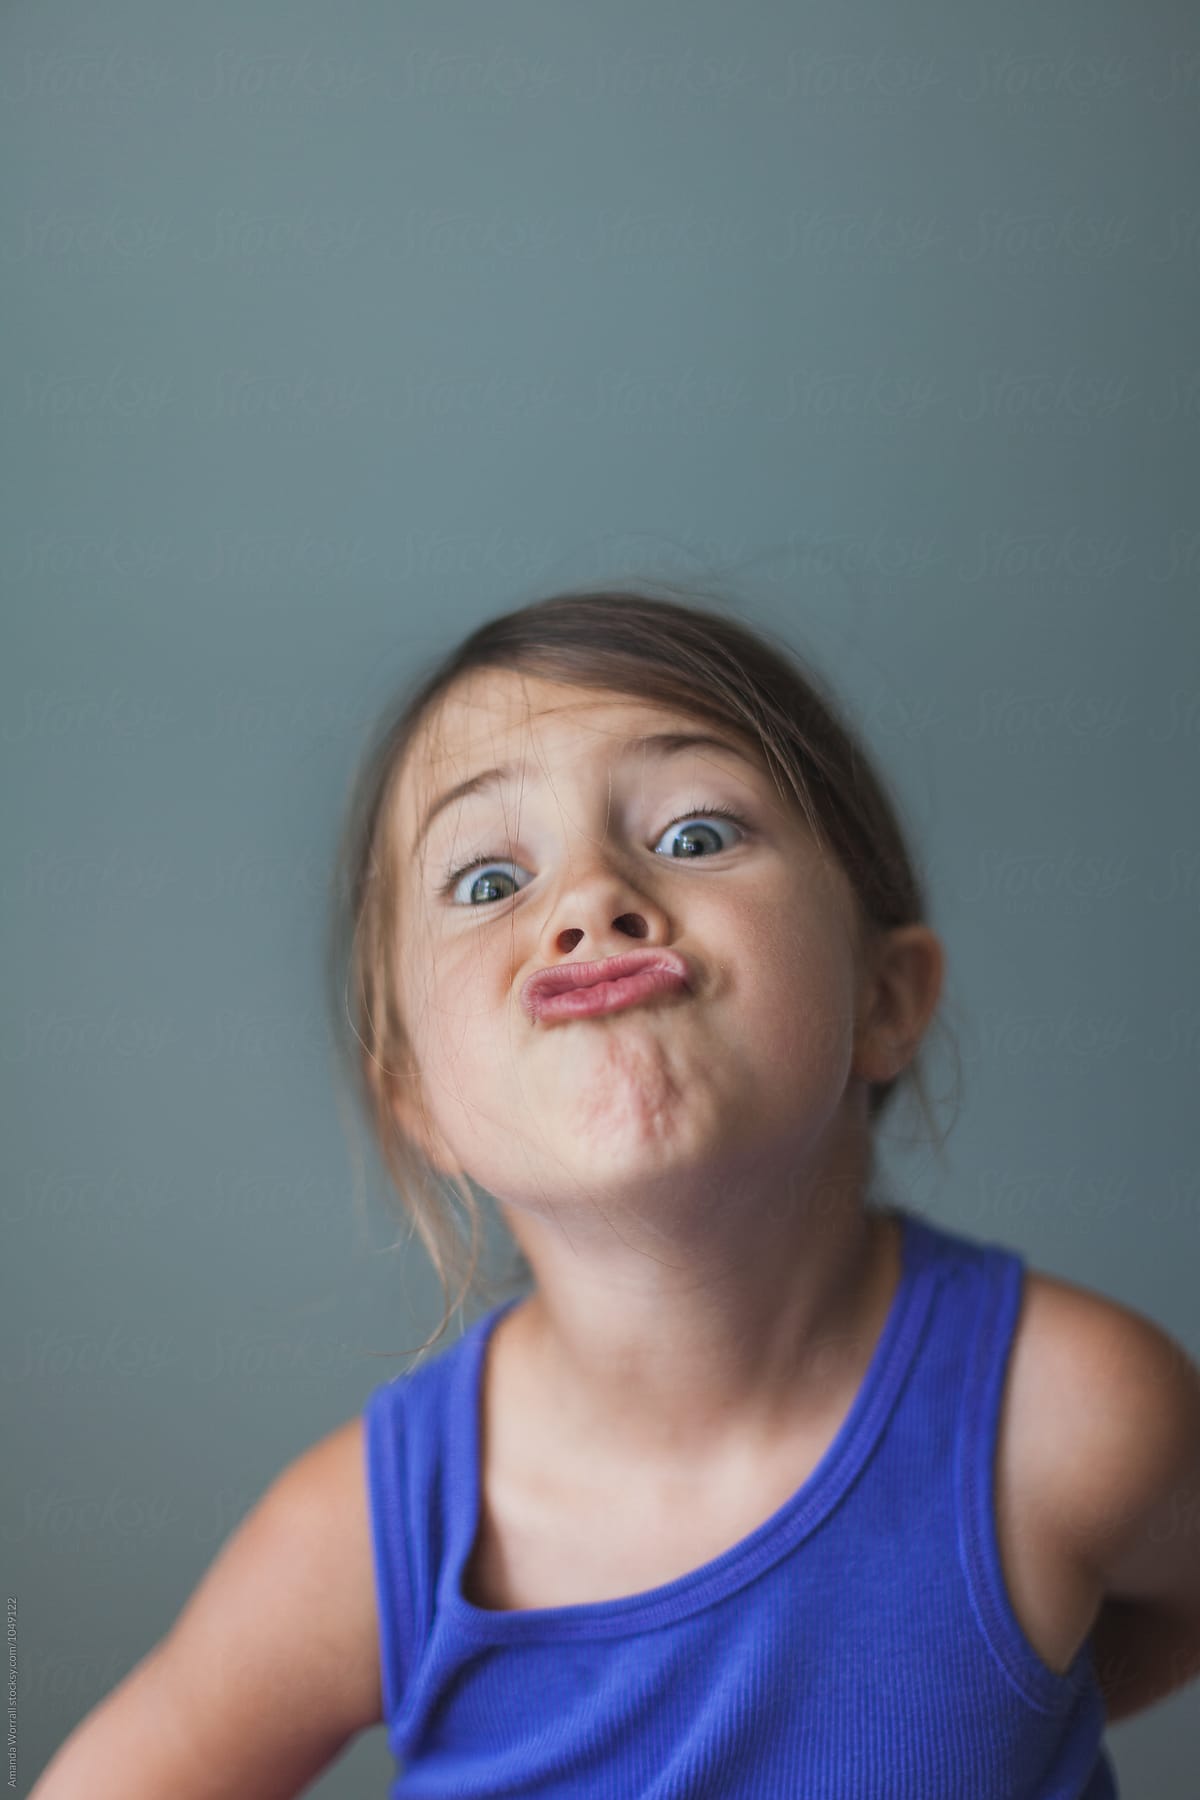 Little Girl Making Silly Face